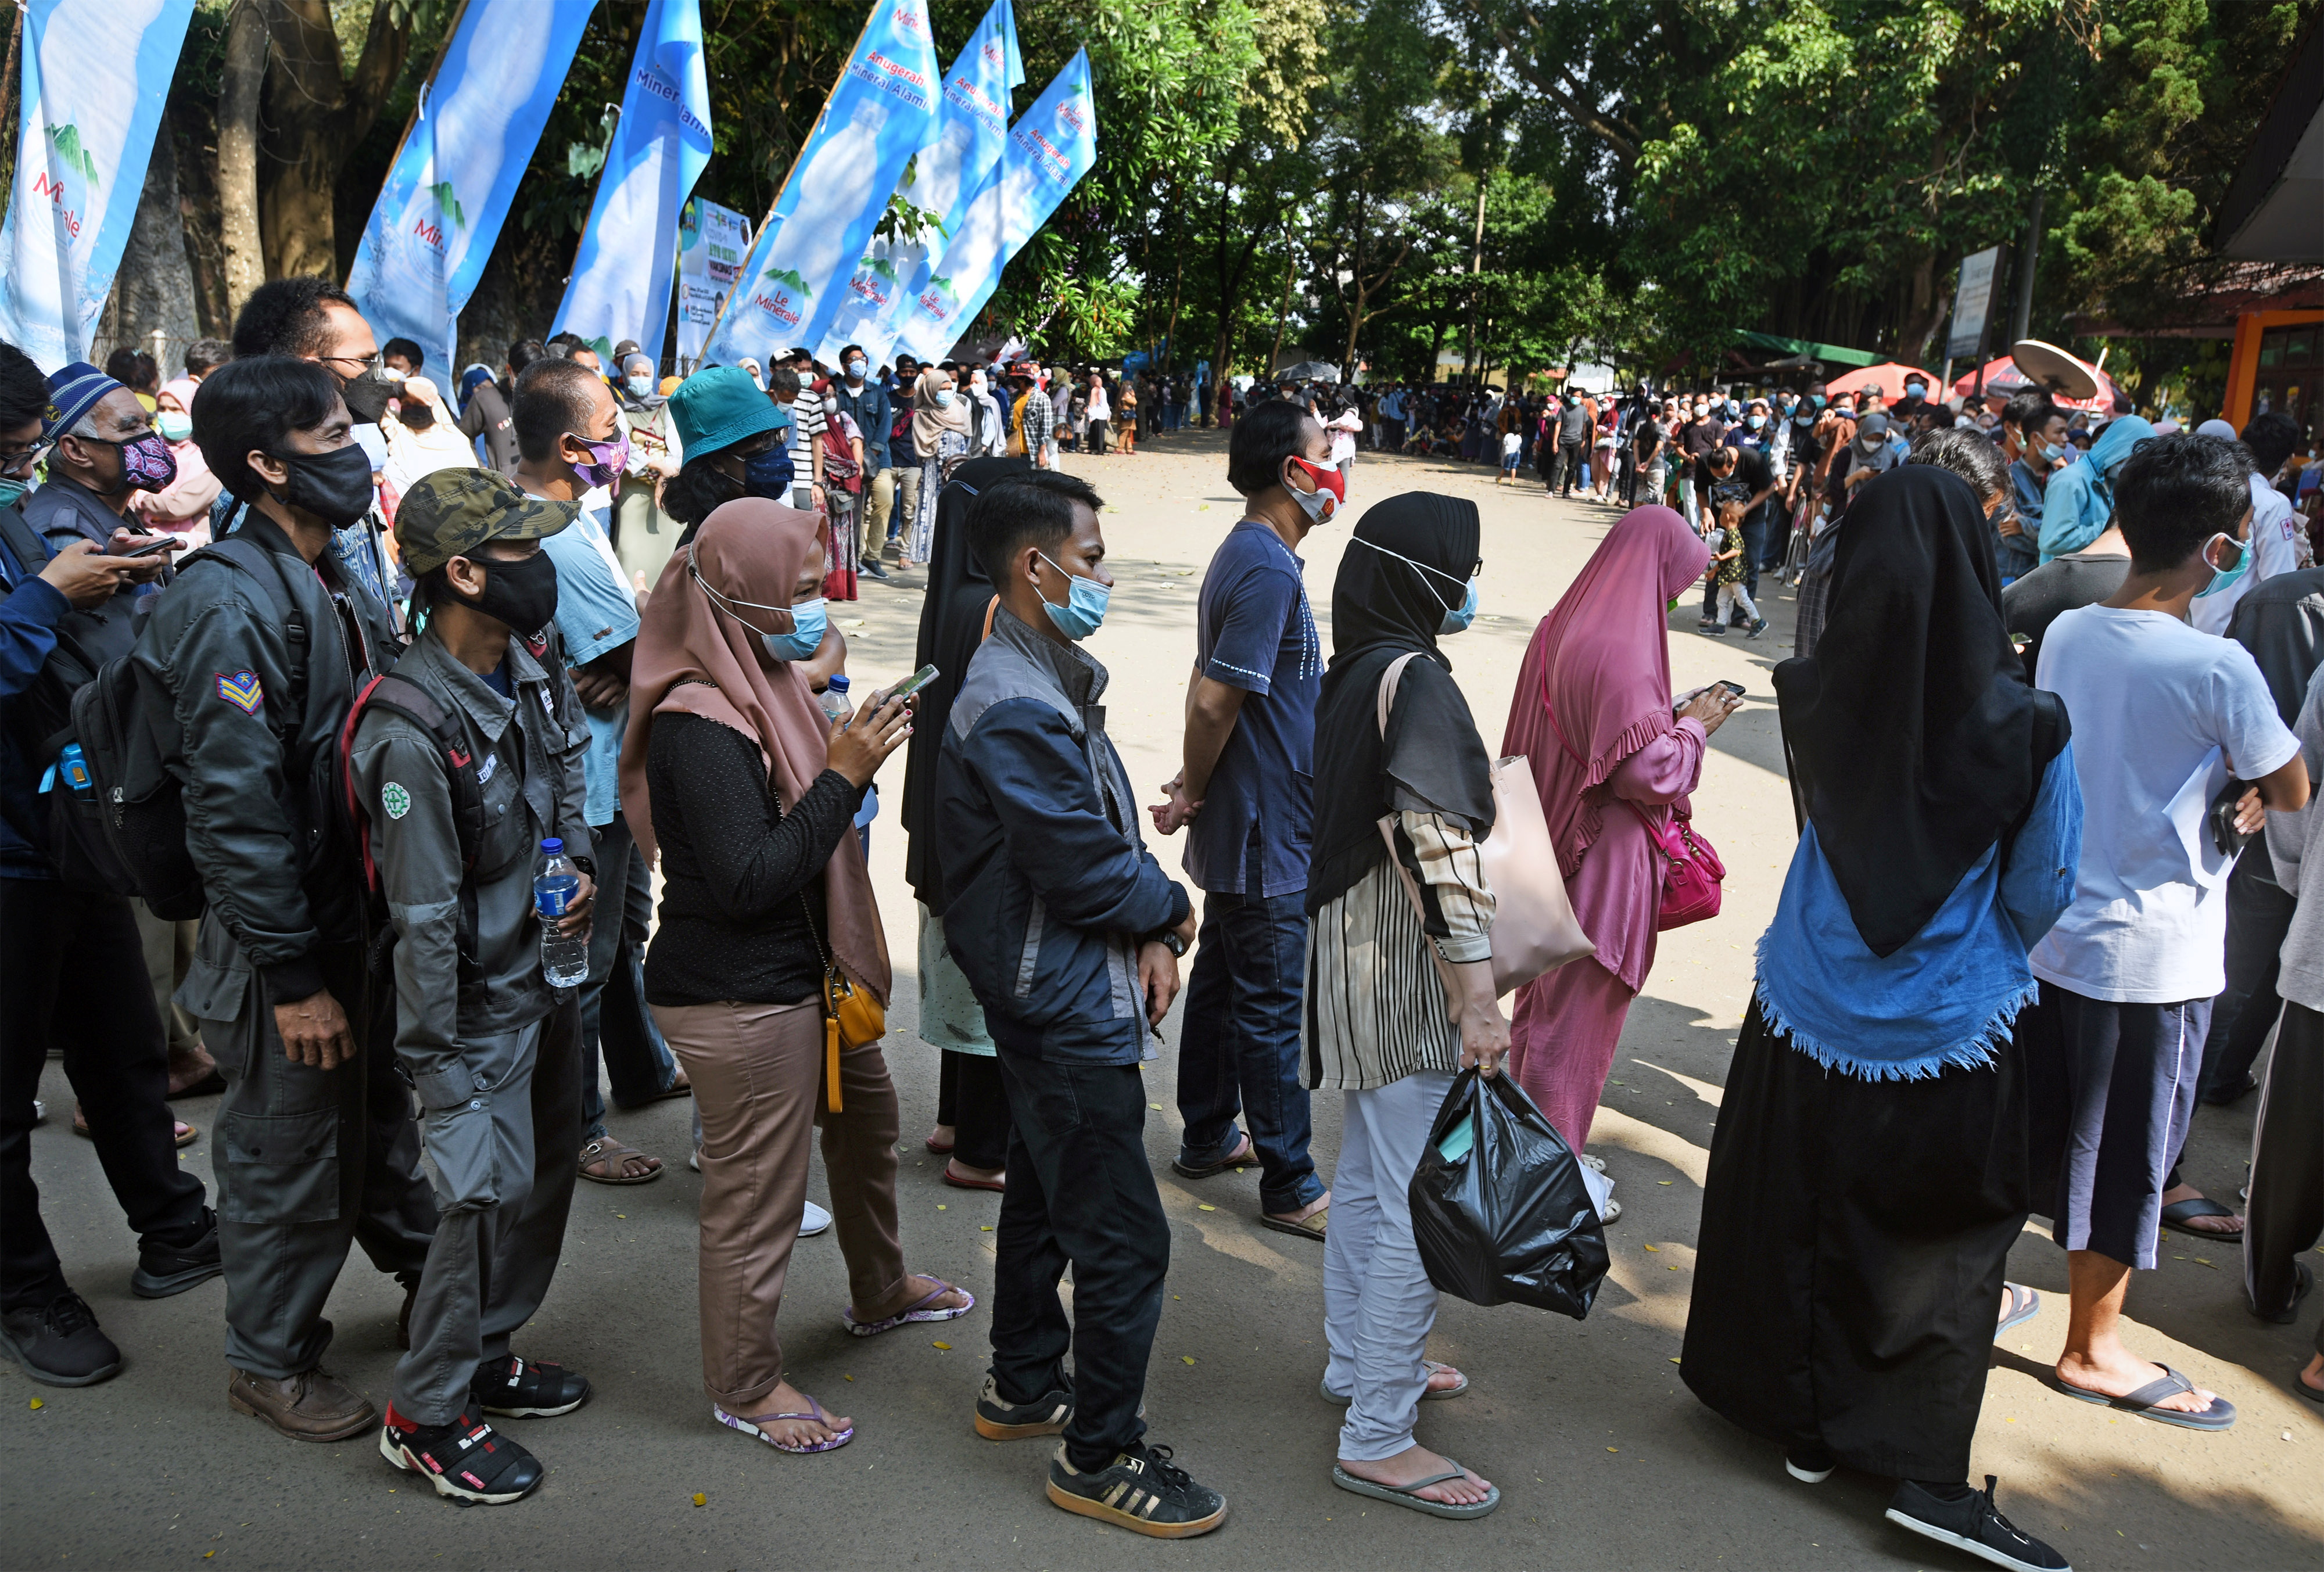 People wearing protective face masks stand in line while waiting to receive their dose of vaccine for the coronavirus disease (COVID-19) during the mass vaccination program at a sports arena